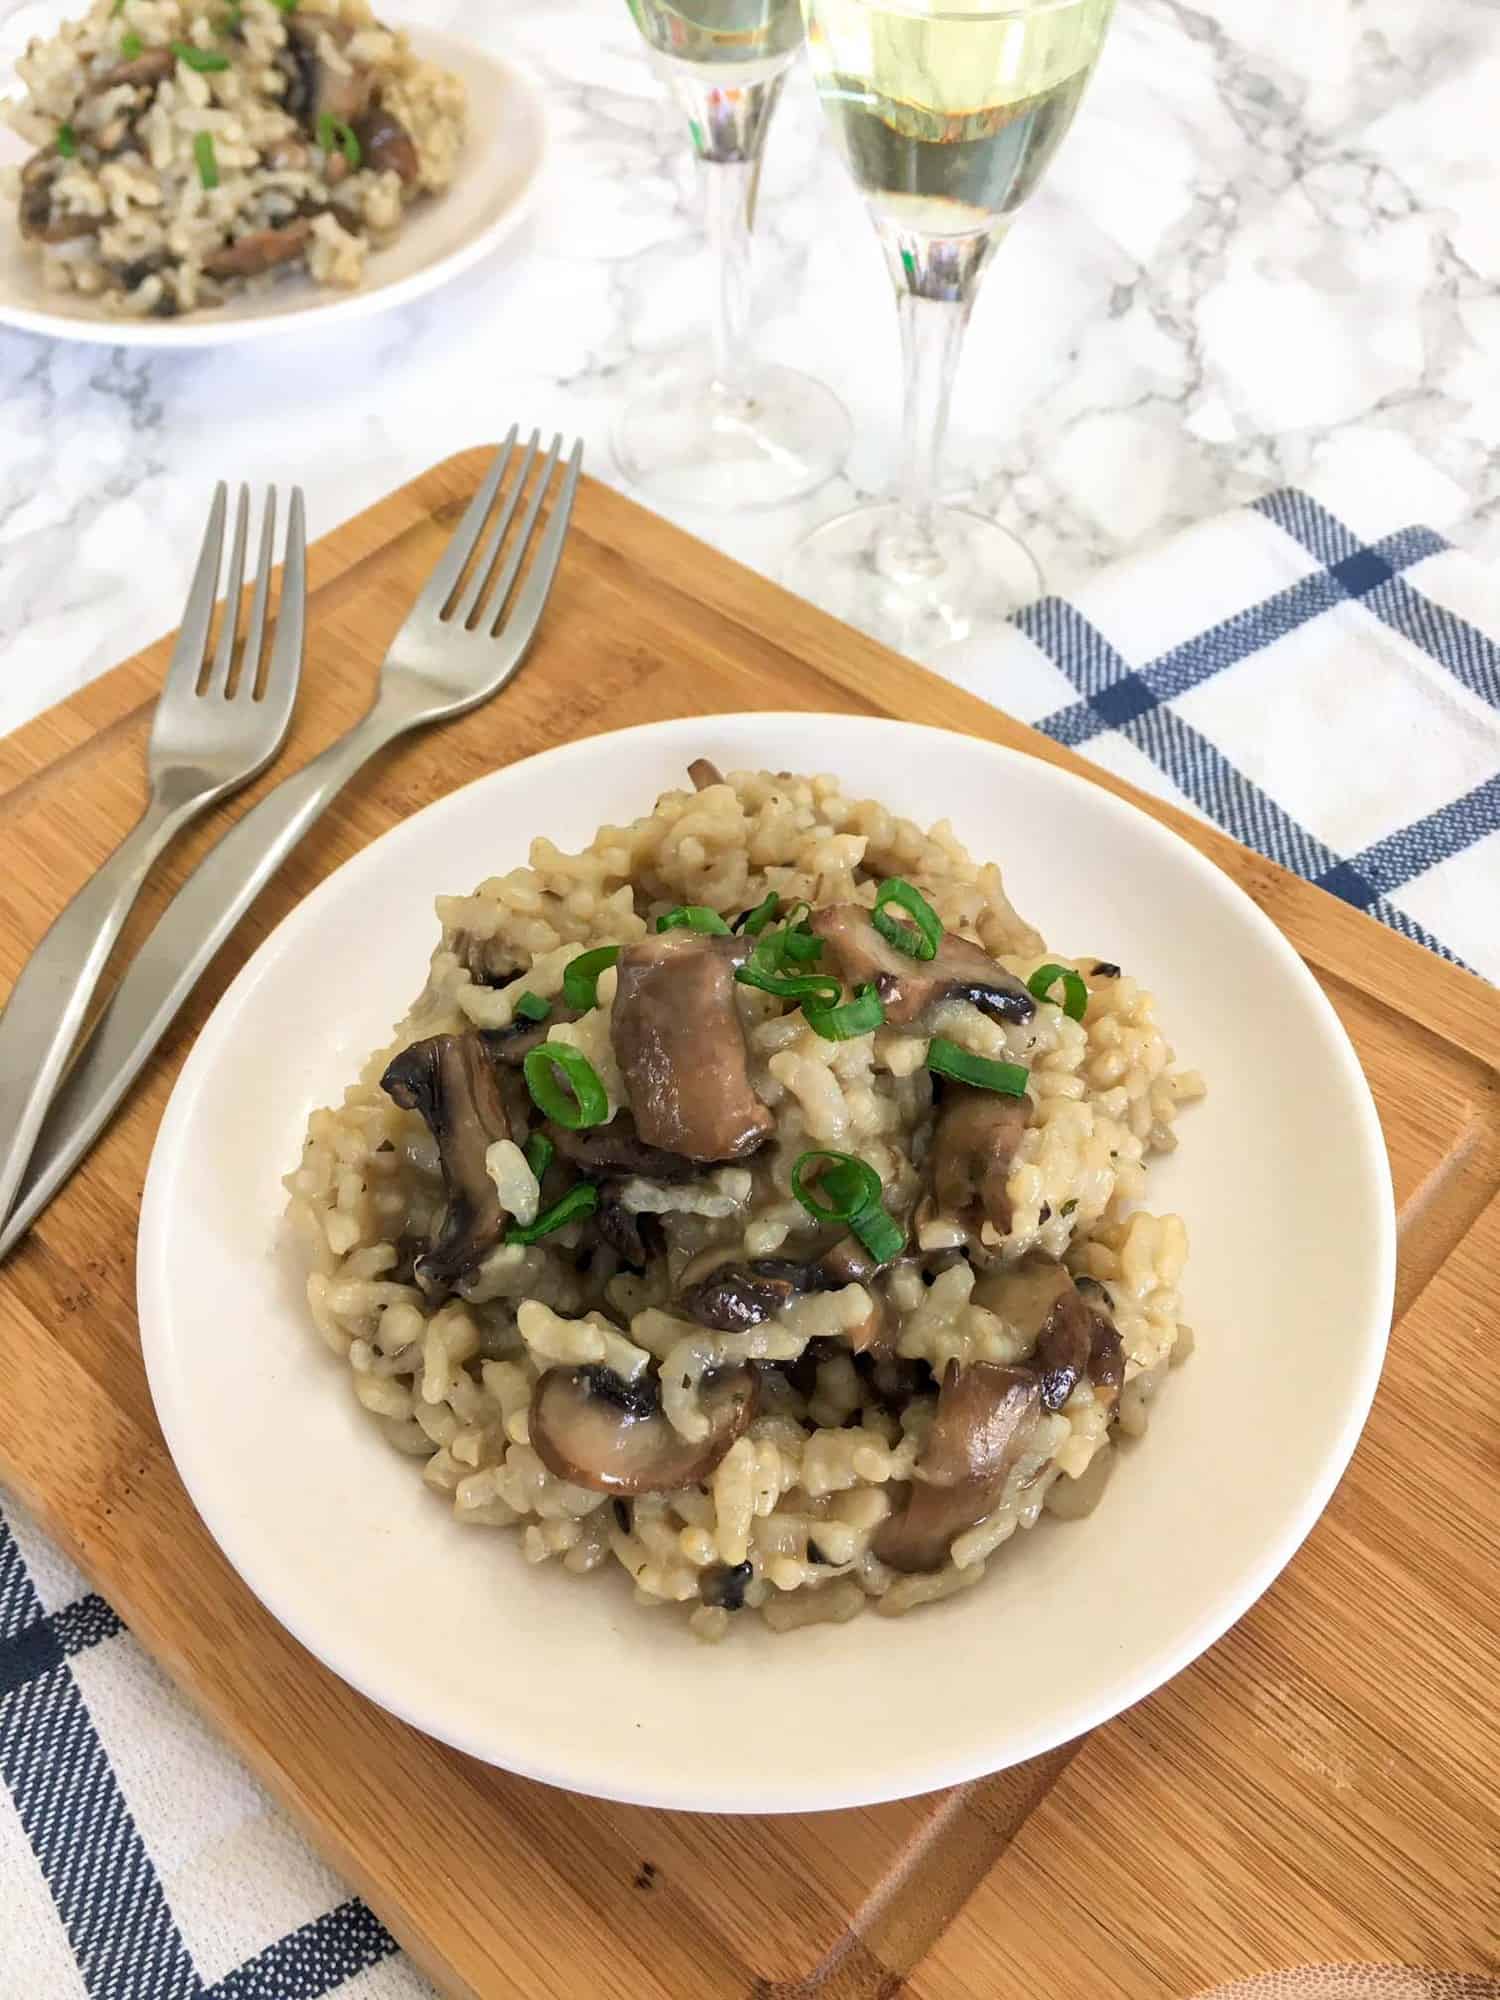 Instant Pot Mushroom Risotto with two forks and two wine glasses.